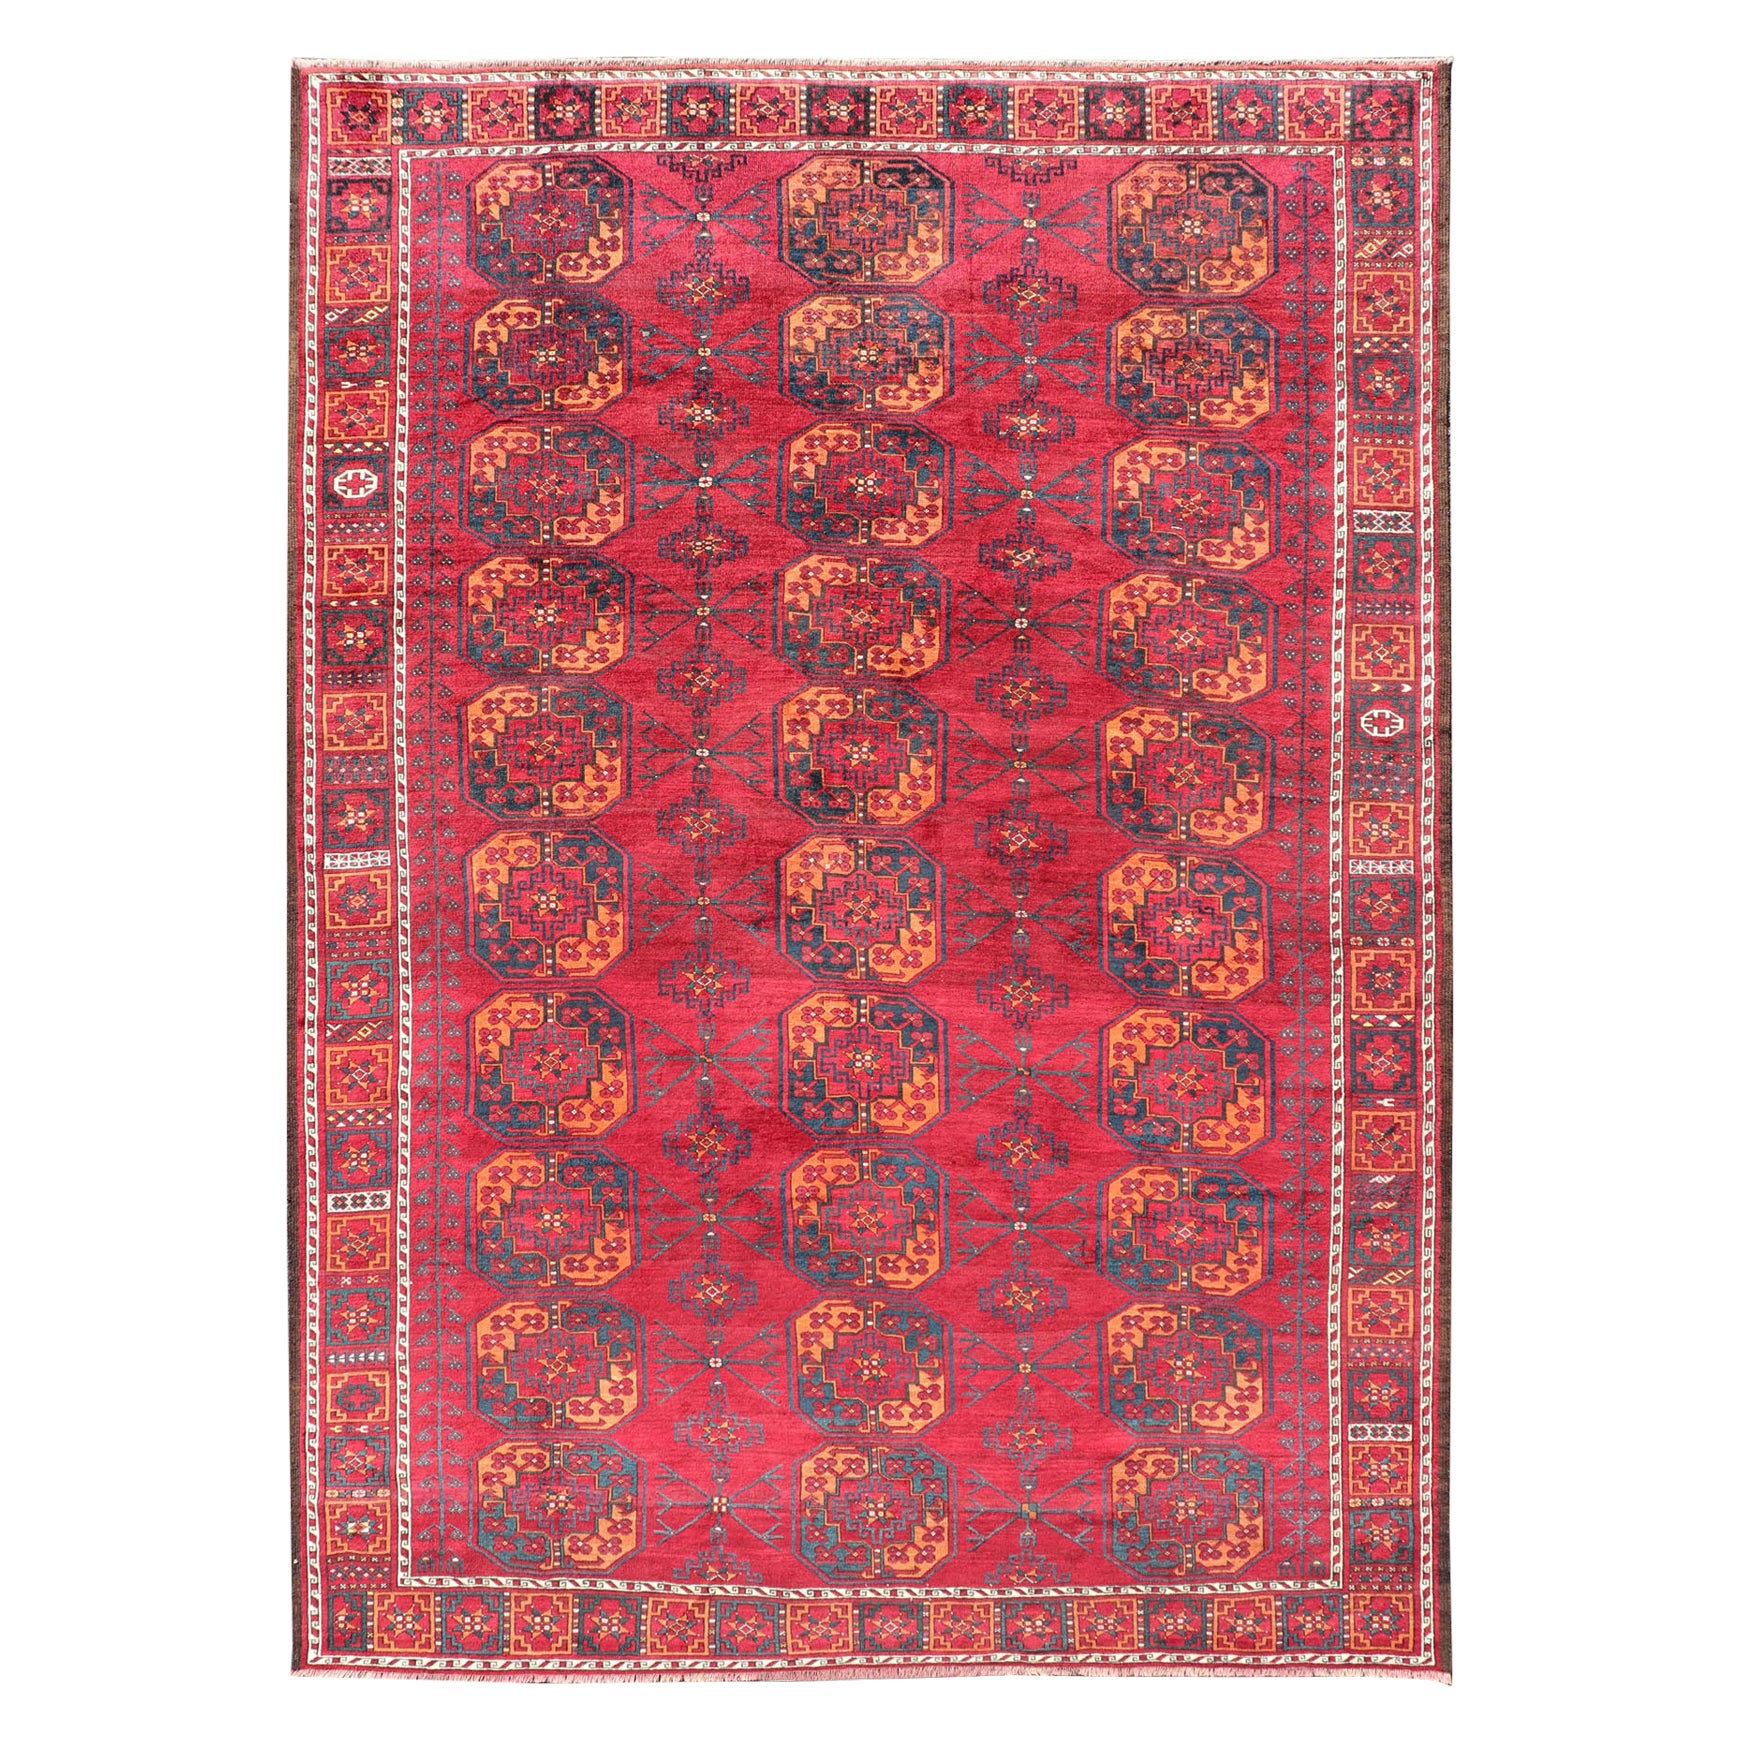 Antique Ersari Rug in Wool with Gul Design in Ivory, Blue, Red and Orange